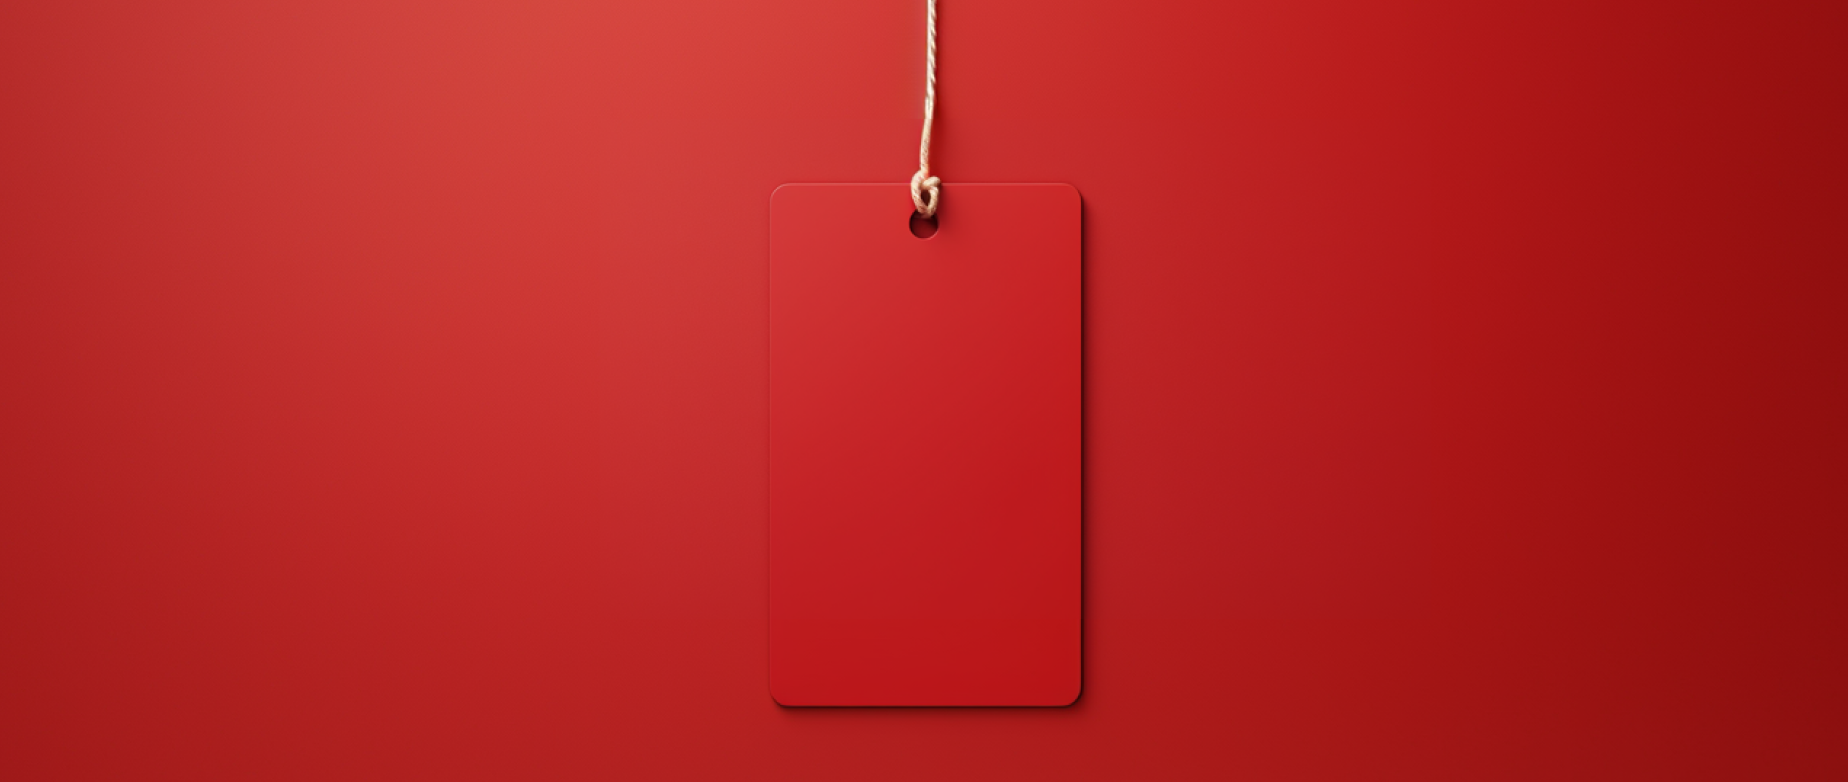 A blank red label on a red background, representing private-label products.